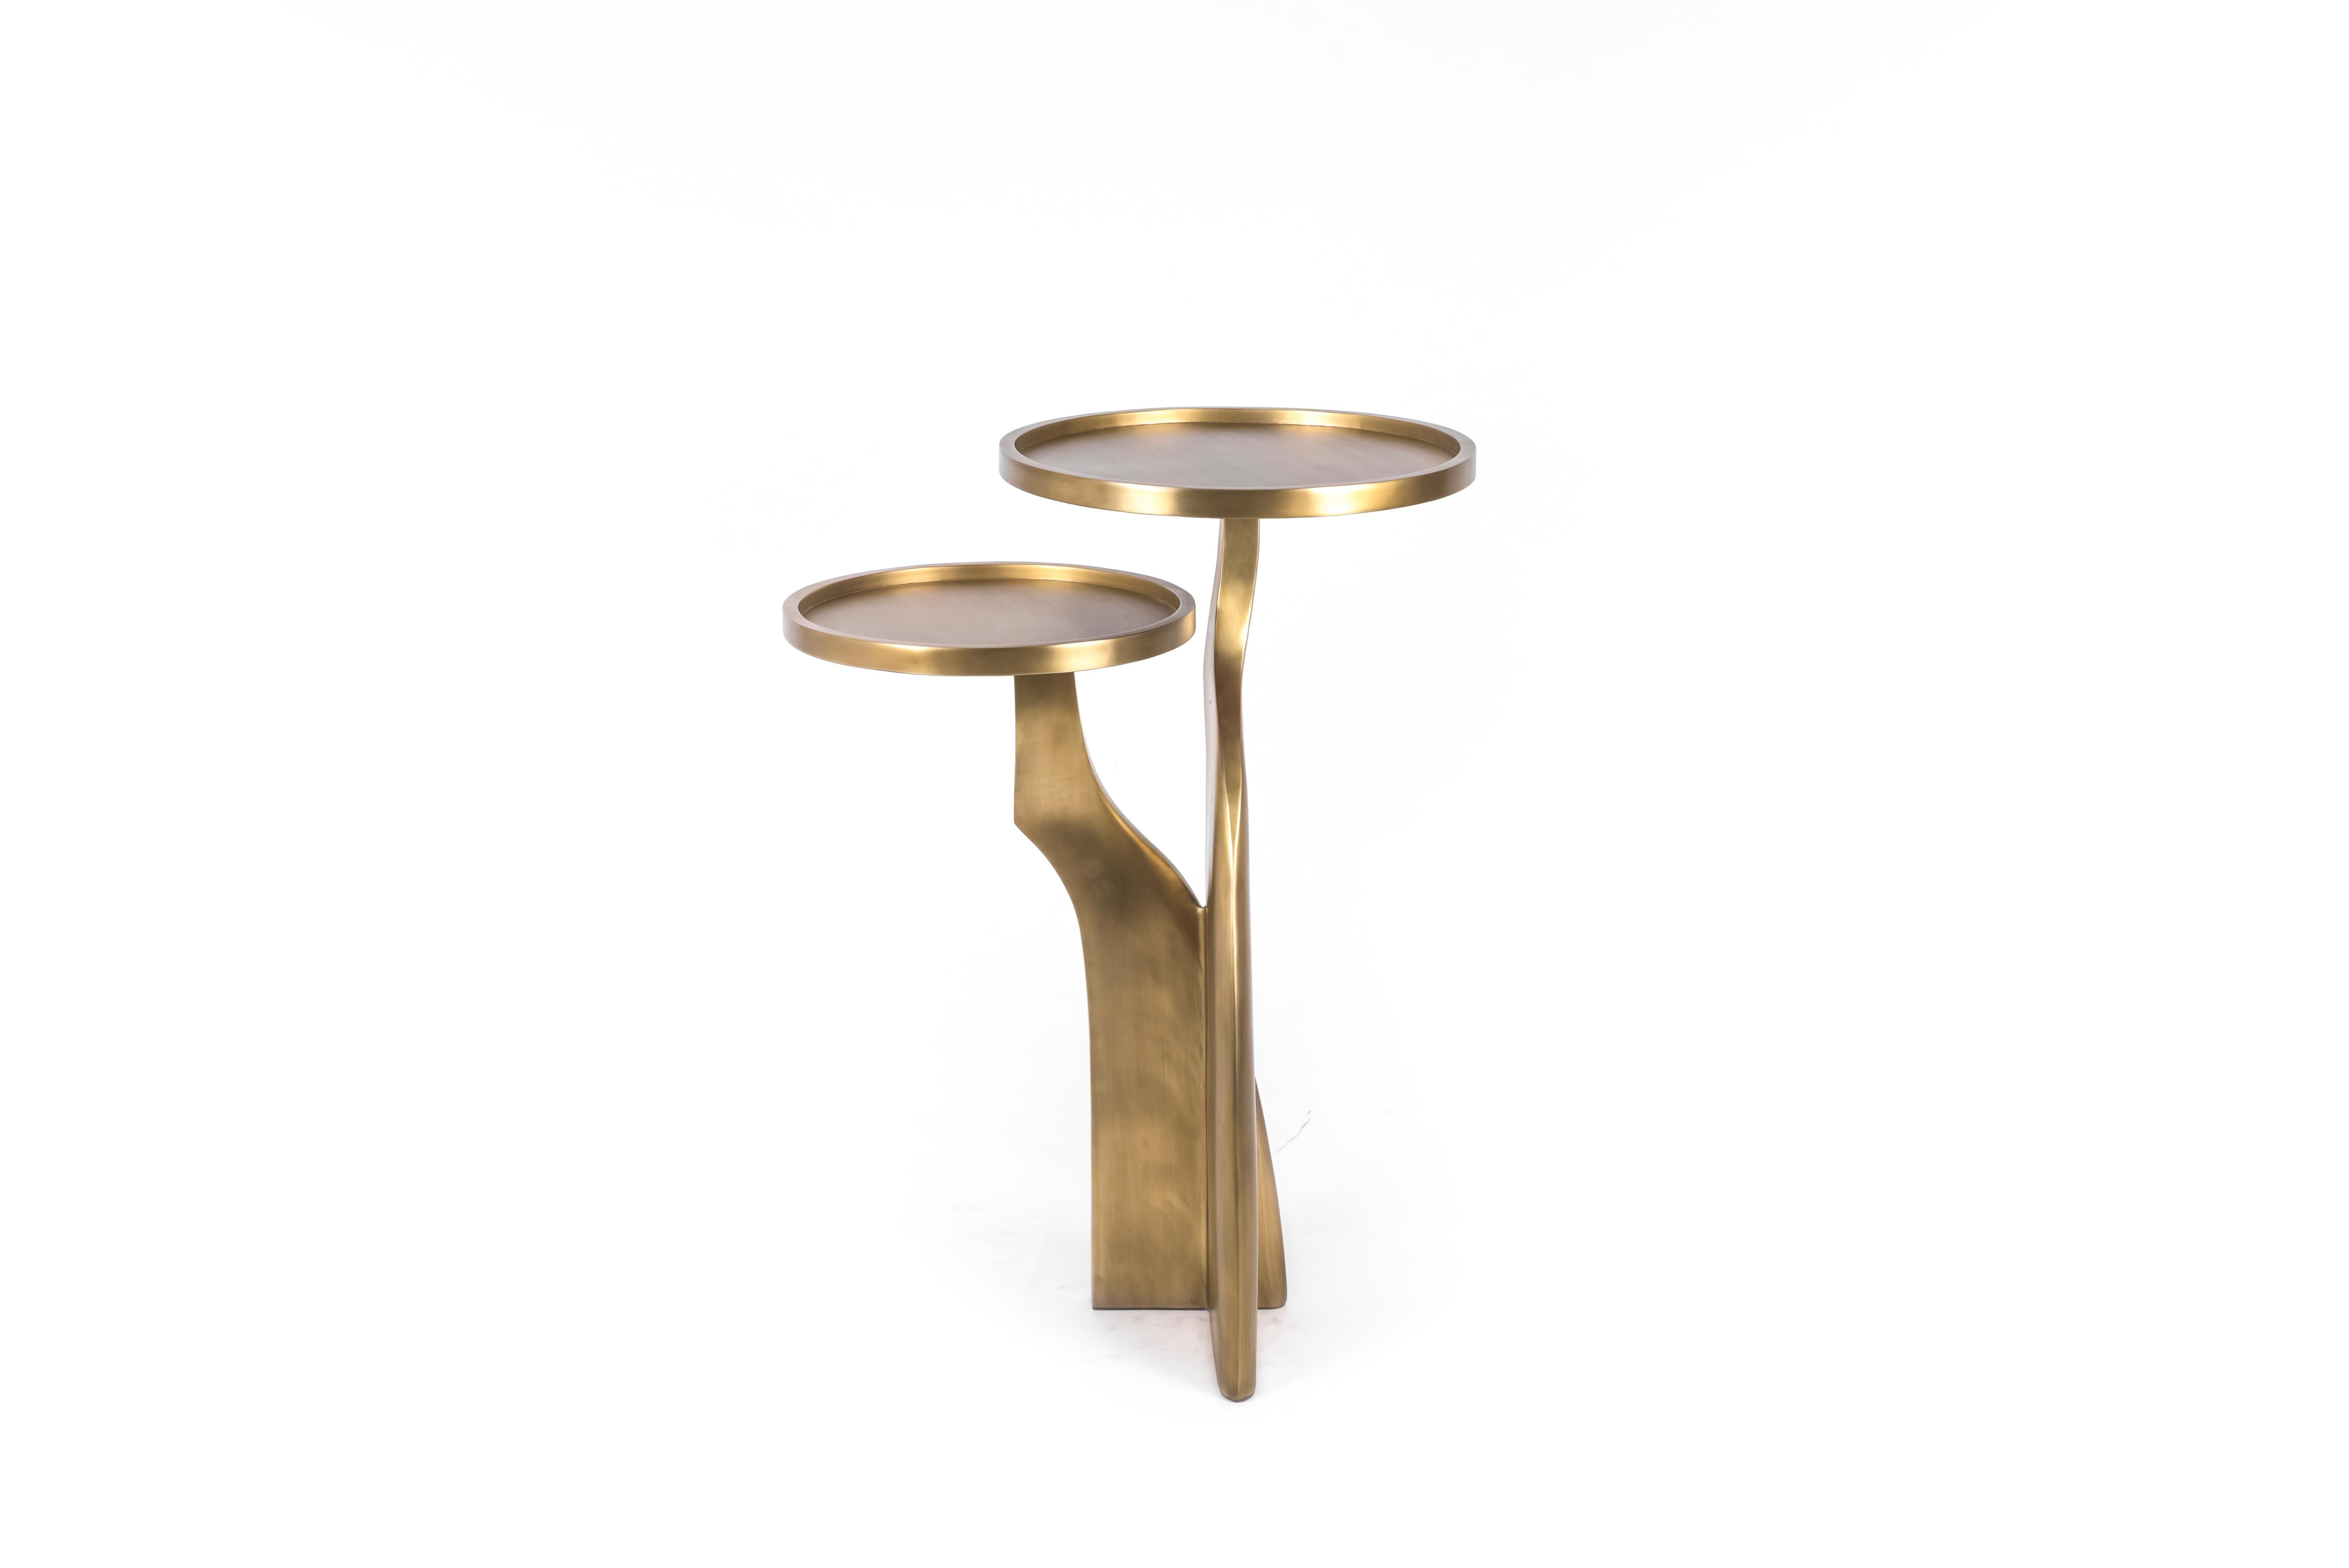 The Chital 2-top side table is both dramatic and organic it’s unique design. The 2-top sits and pair of ethereal and sculptural legs are all fully inlaid in bronze-patina brass. This piece makes for the perfect end table and is originally inspired